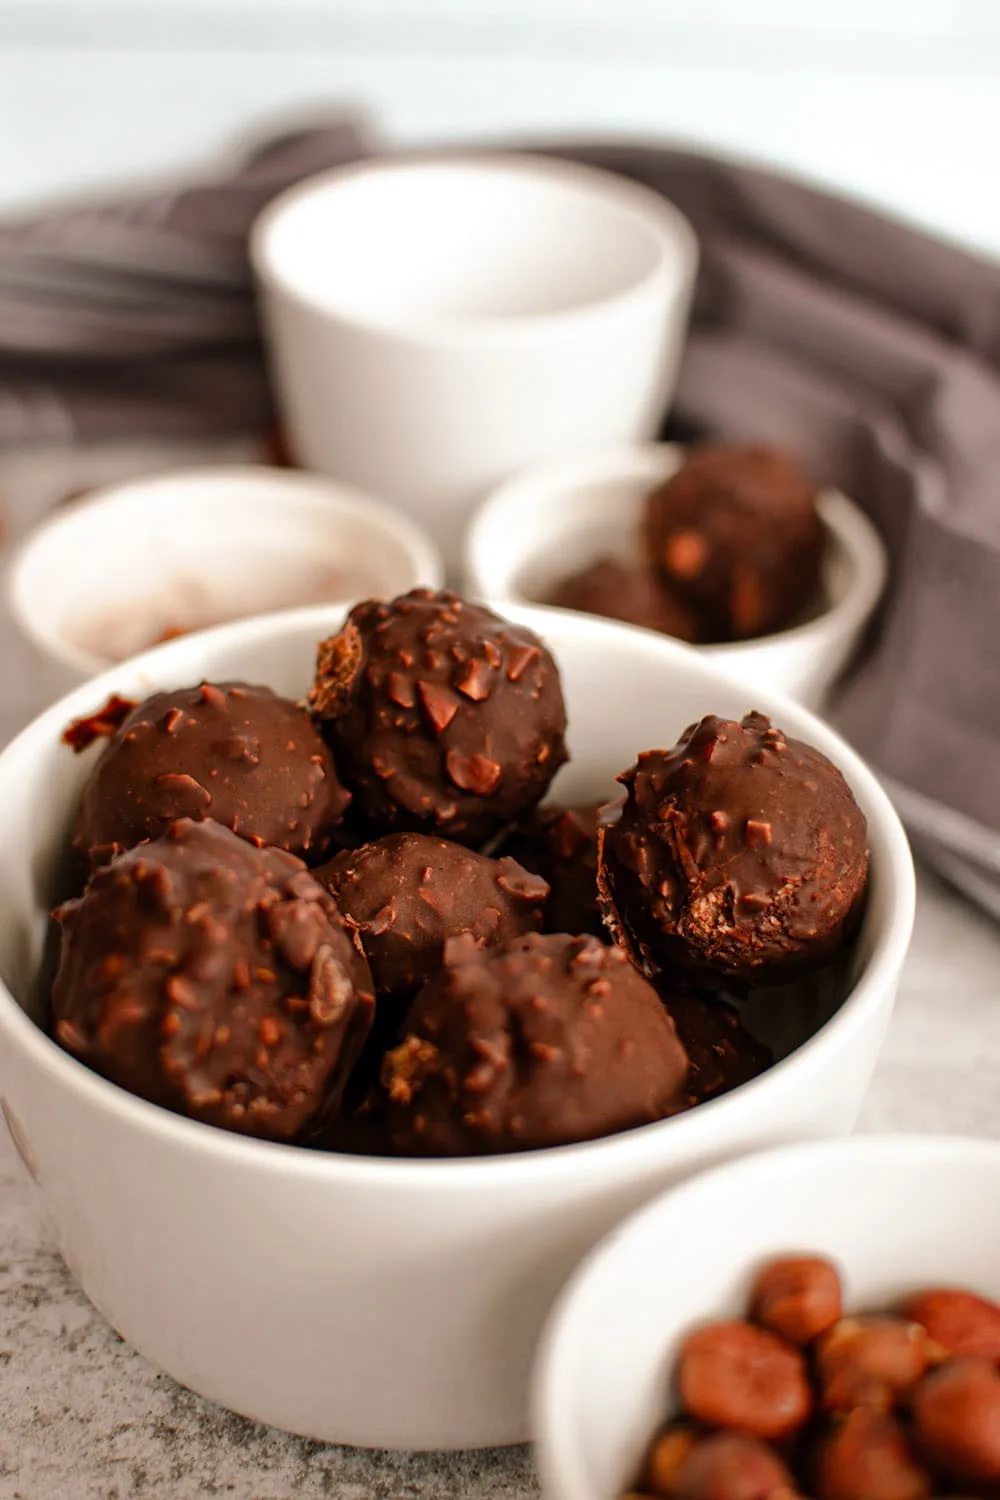 Chocolate date bites in a bowl.